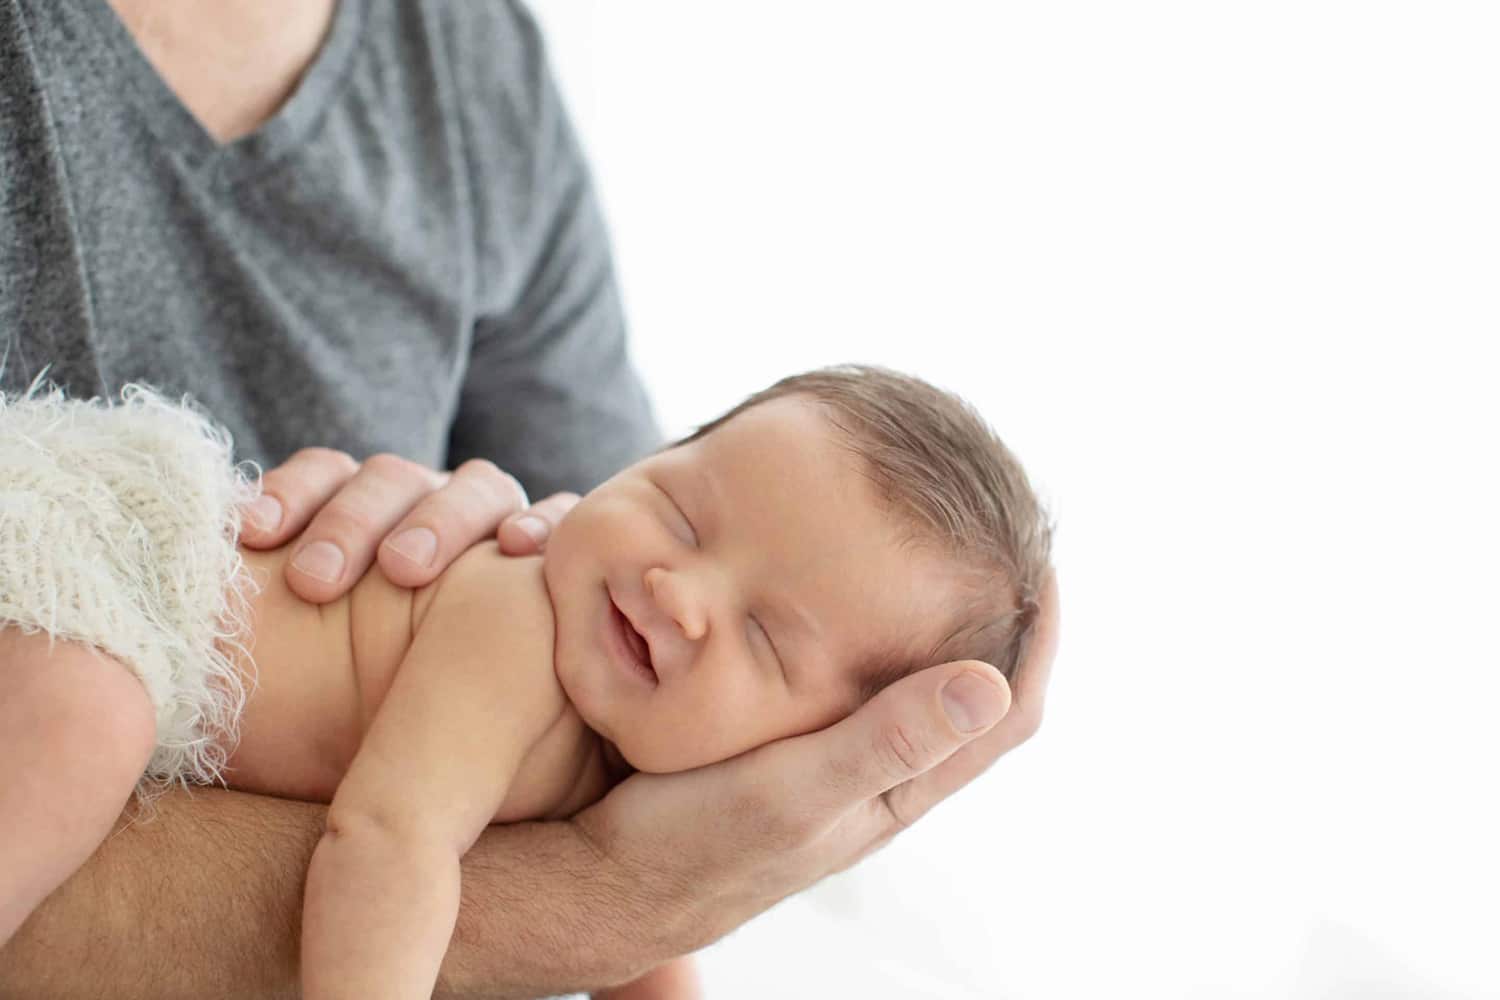 A newborn baby smiles in its dad's arm.